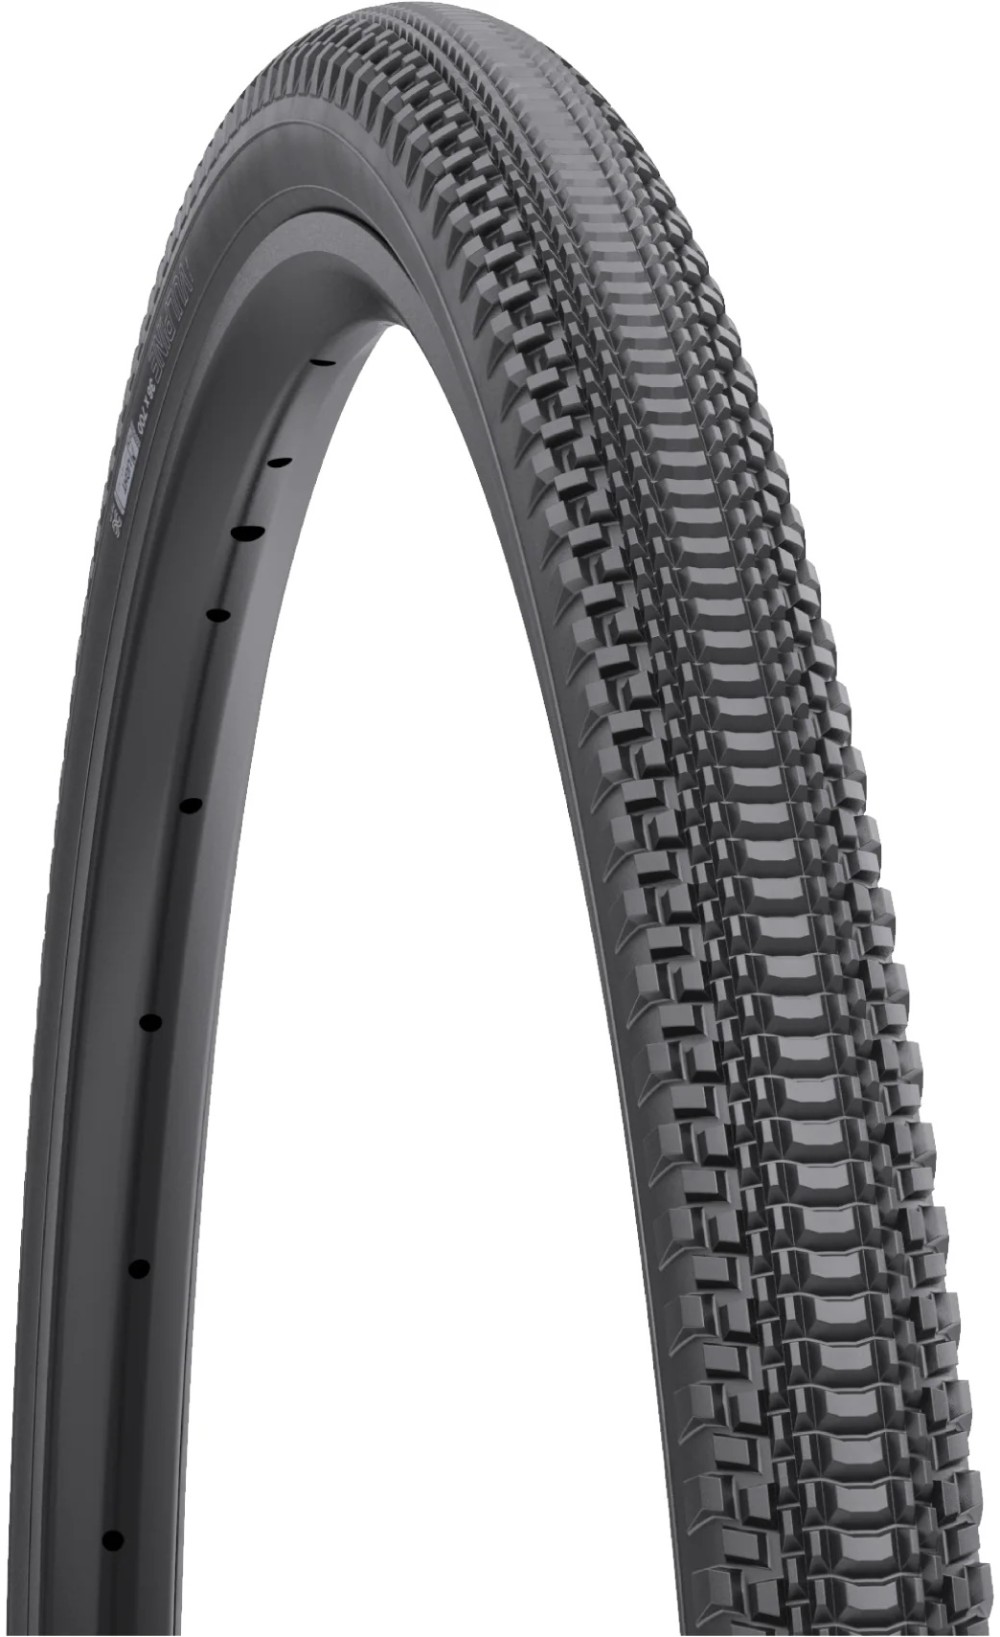 Vulpine TCS Light/Fast Rolling 60tpi Dual DNA 700c Tyre image 0